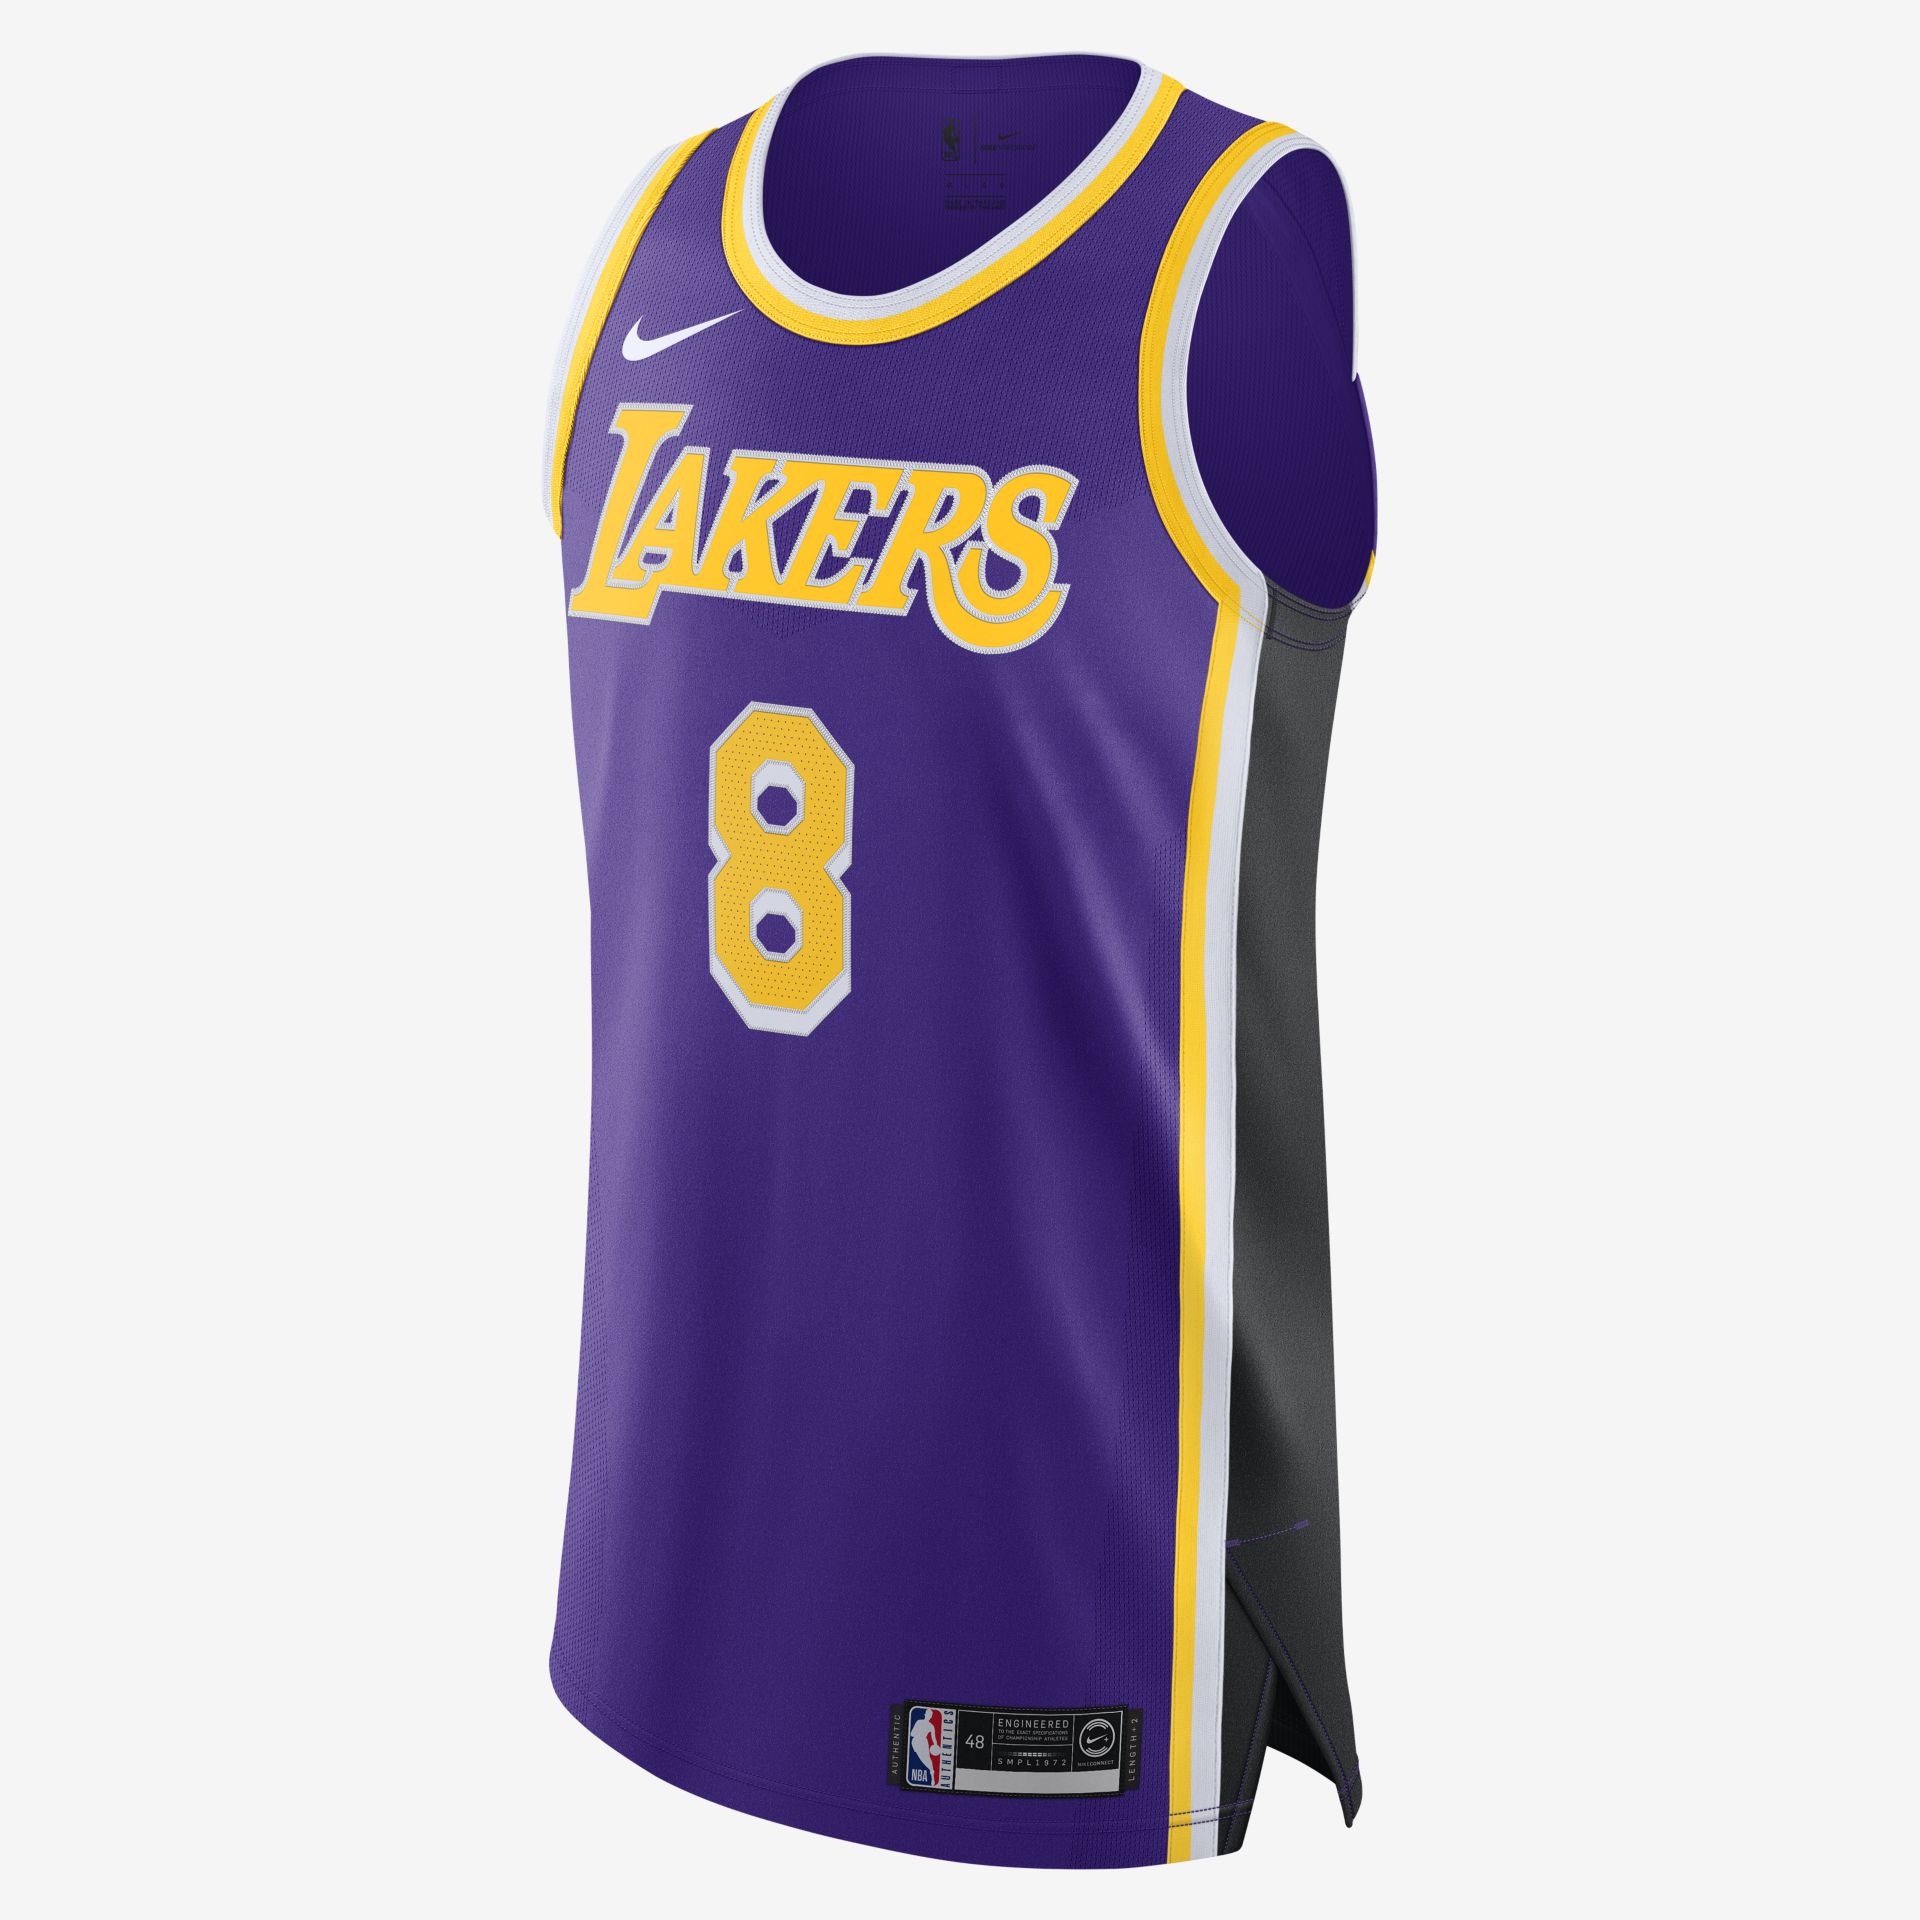 Nike Kobe Bryant Los Angeles Lakers Authentic Jersey